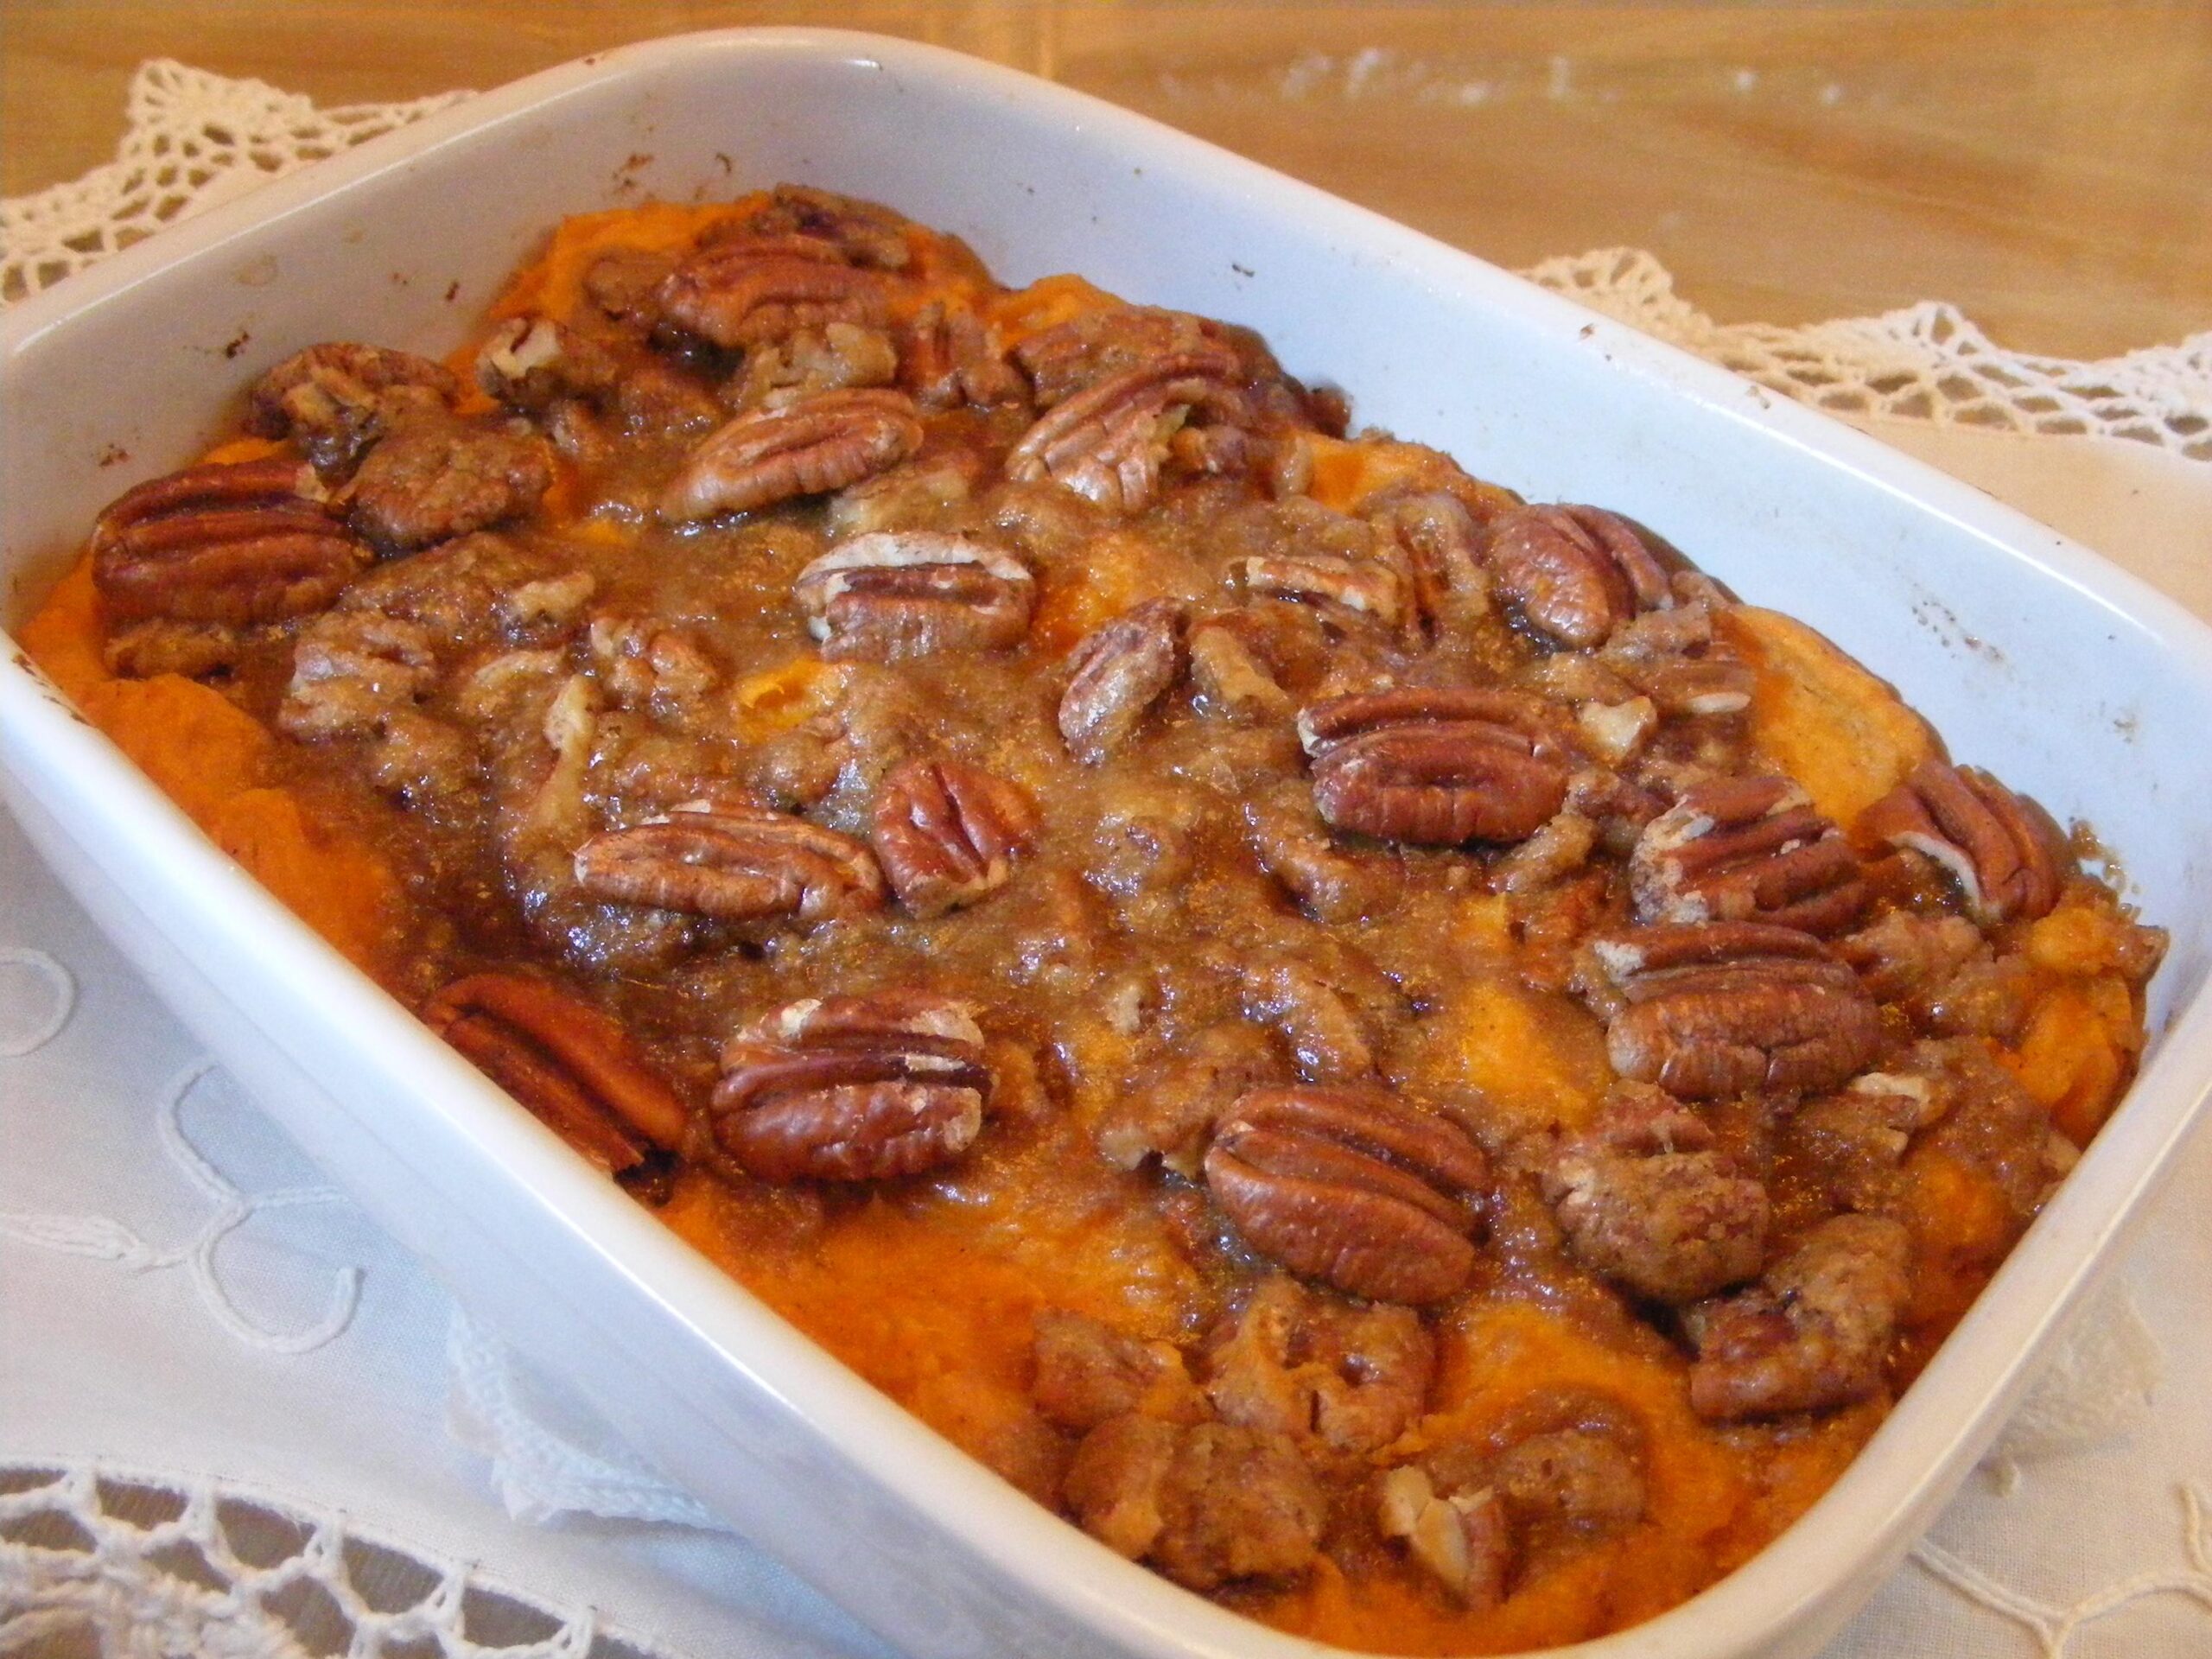  Just in time for the fall season, enjoy this sweet and savory southern-style sweet potato casserole.